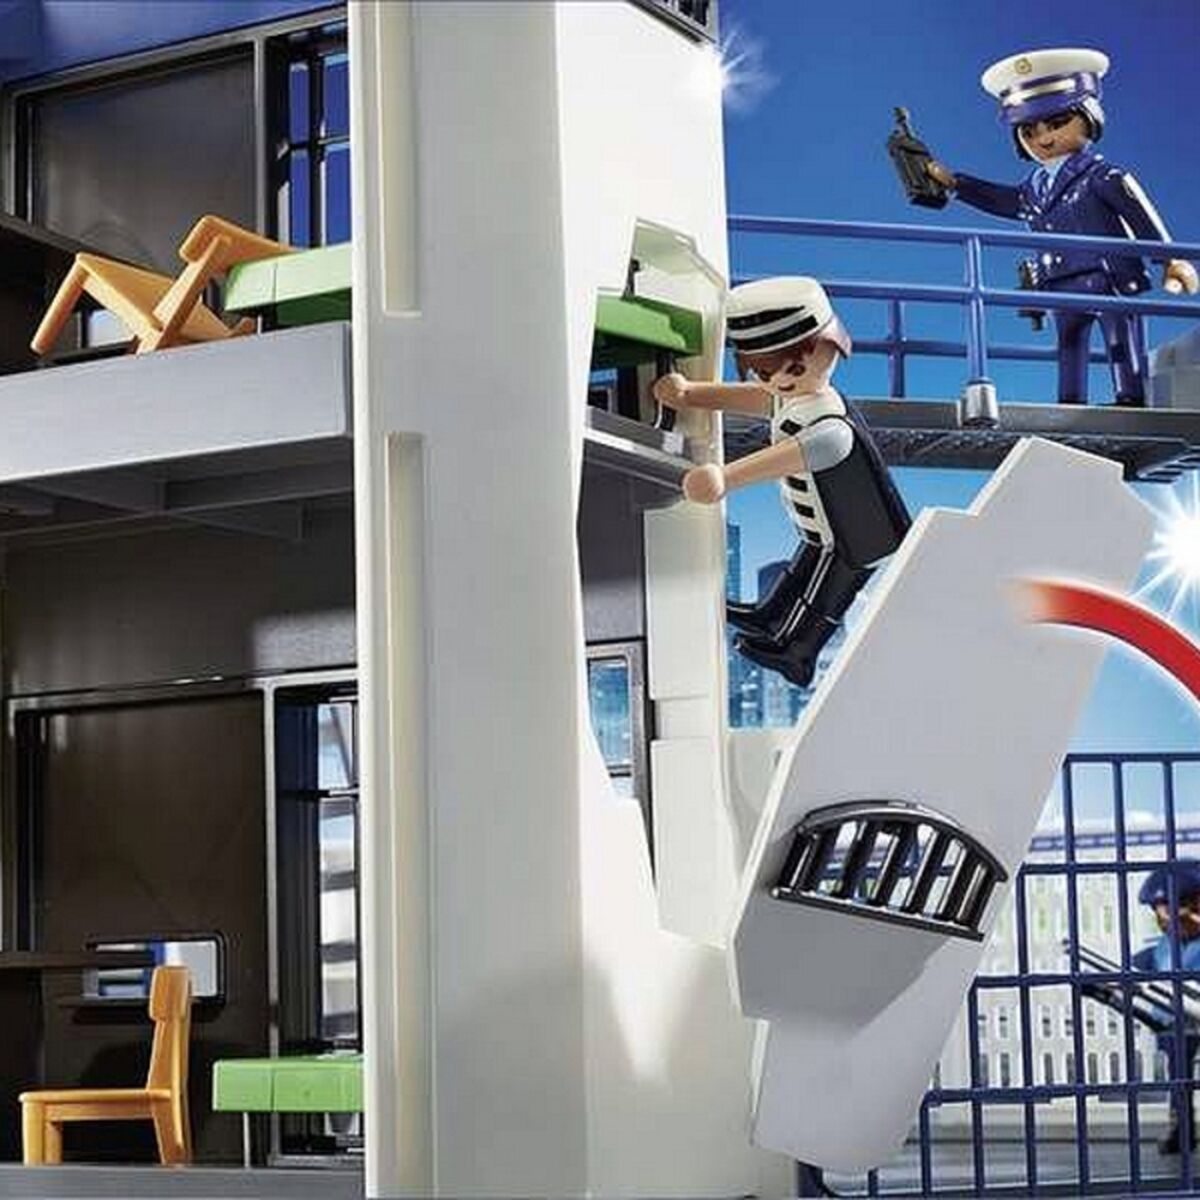 Playmobil City Action Police Station with Prison Playmobil 6919